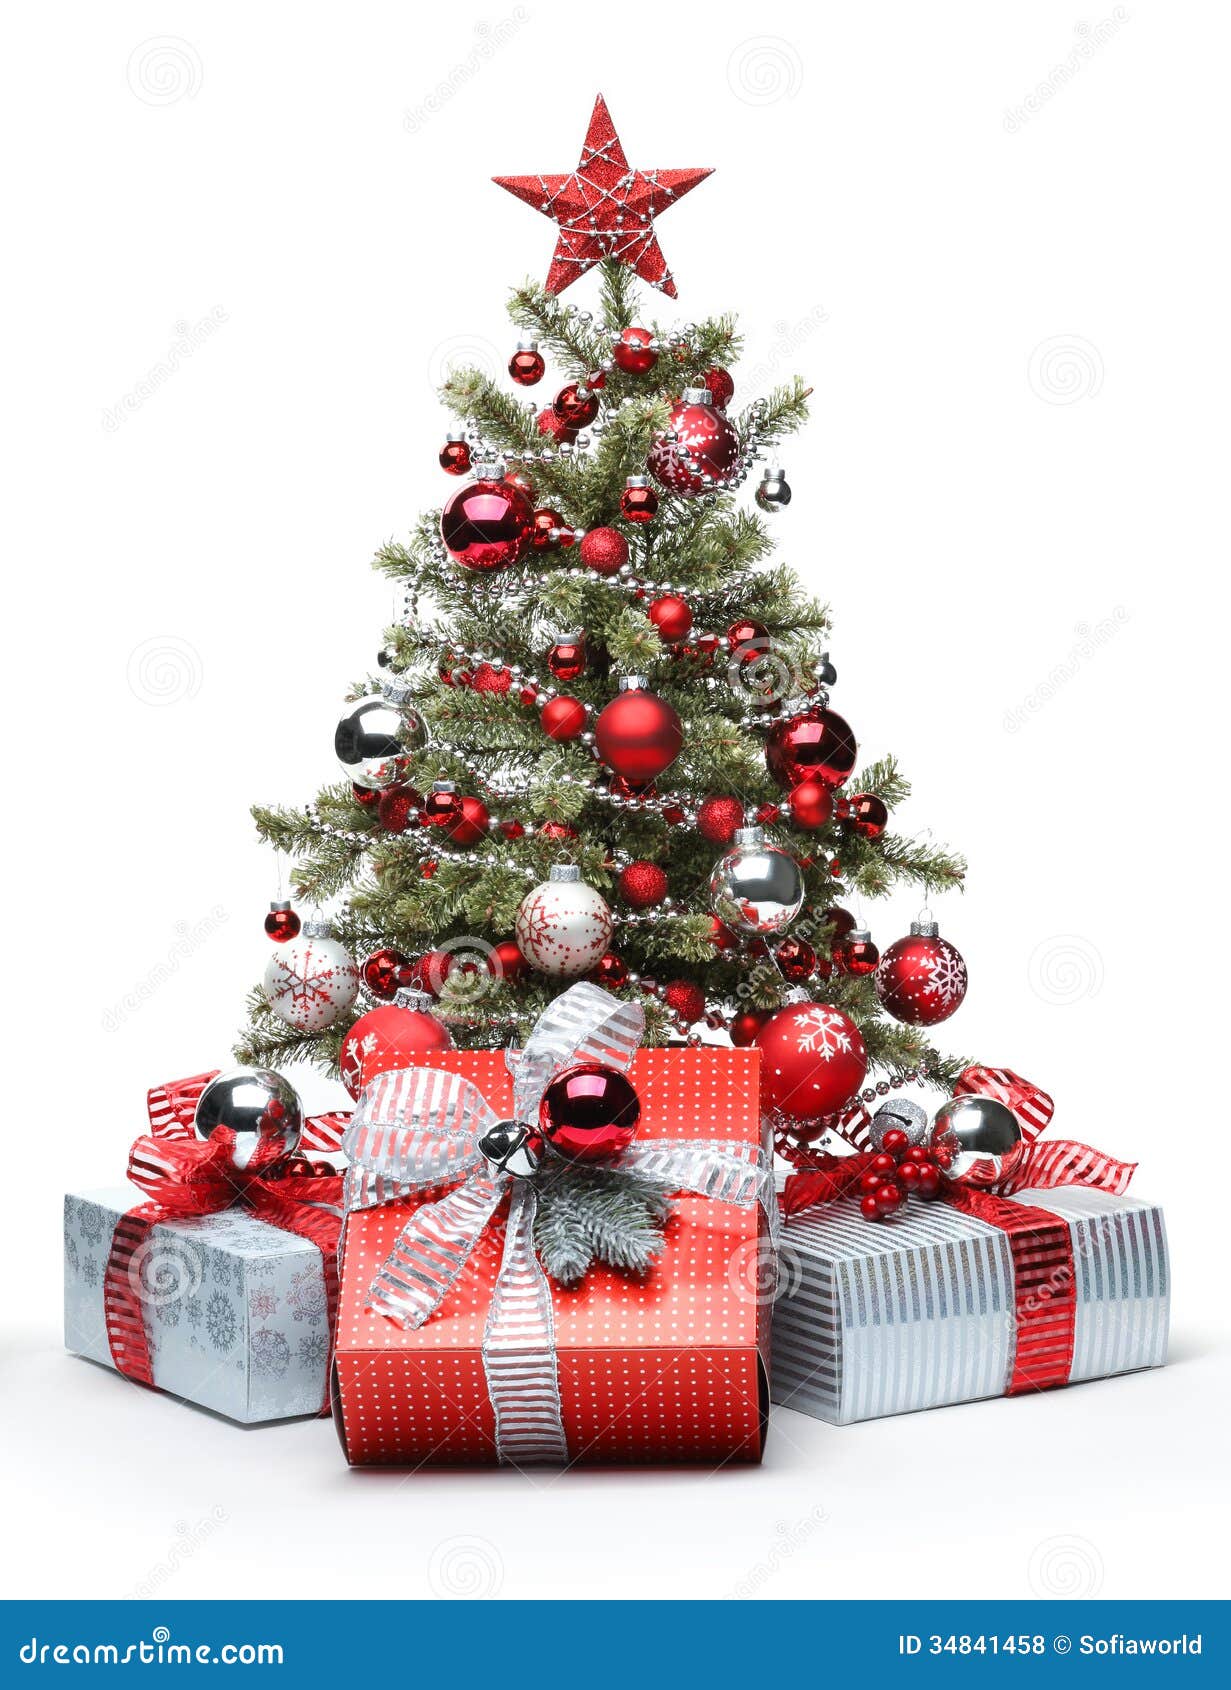 Decorated Christmas Tree And Gifts Royalty Free Stock